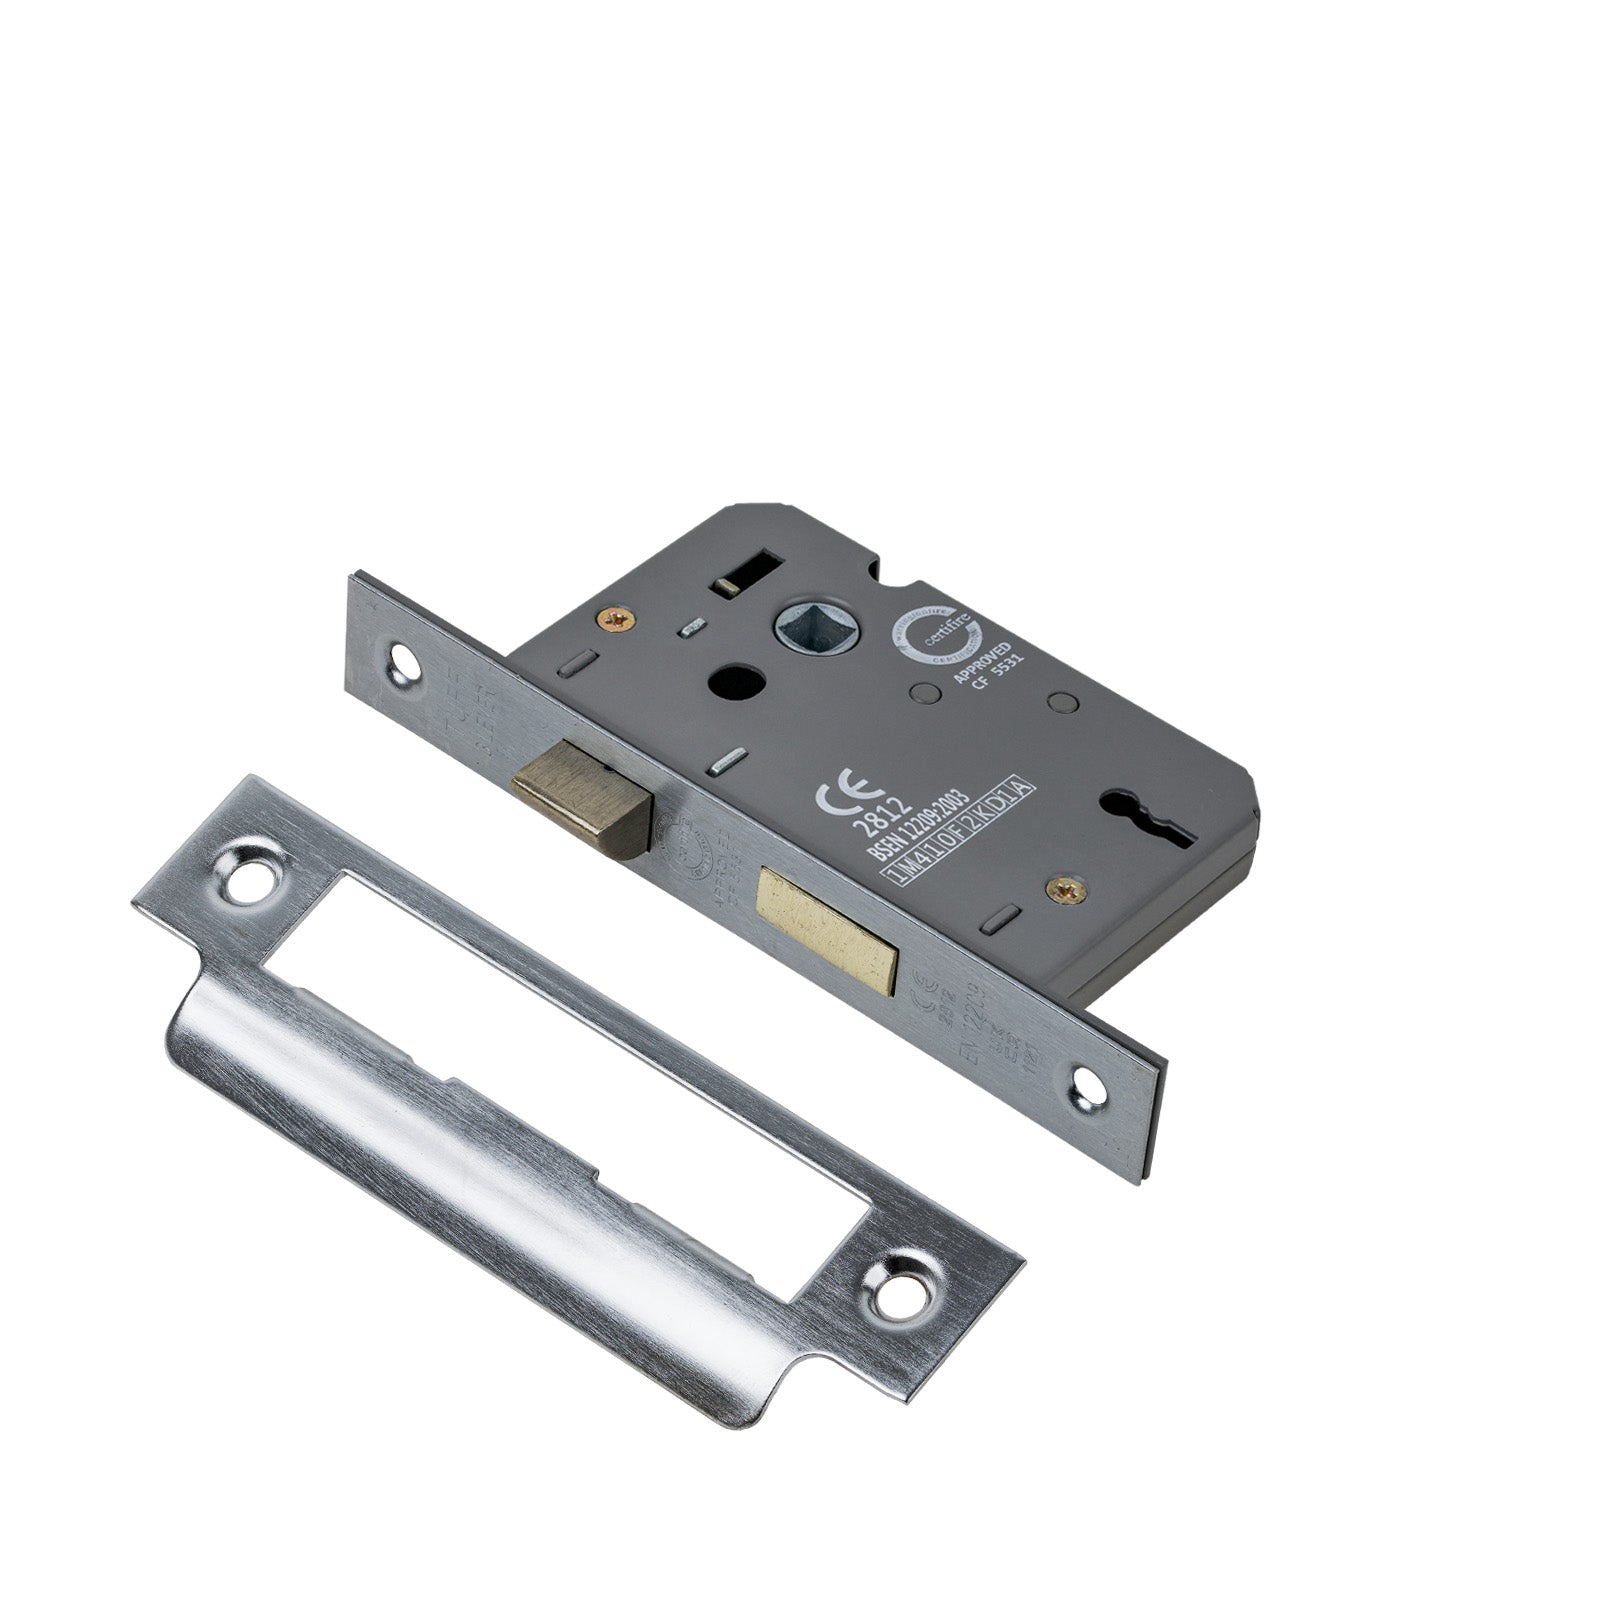 SHOW 3 Lever Sash Lock - 2.5 Inch with Satin Chrome finished forend and striker plate